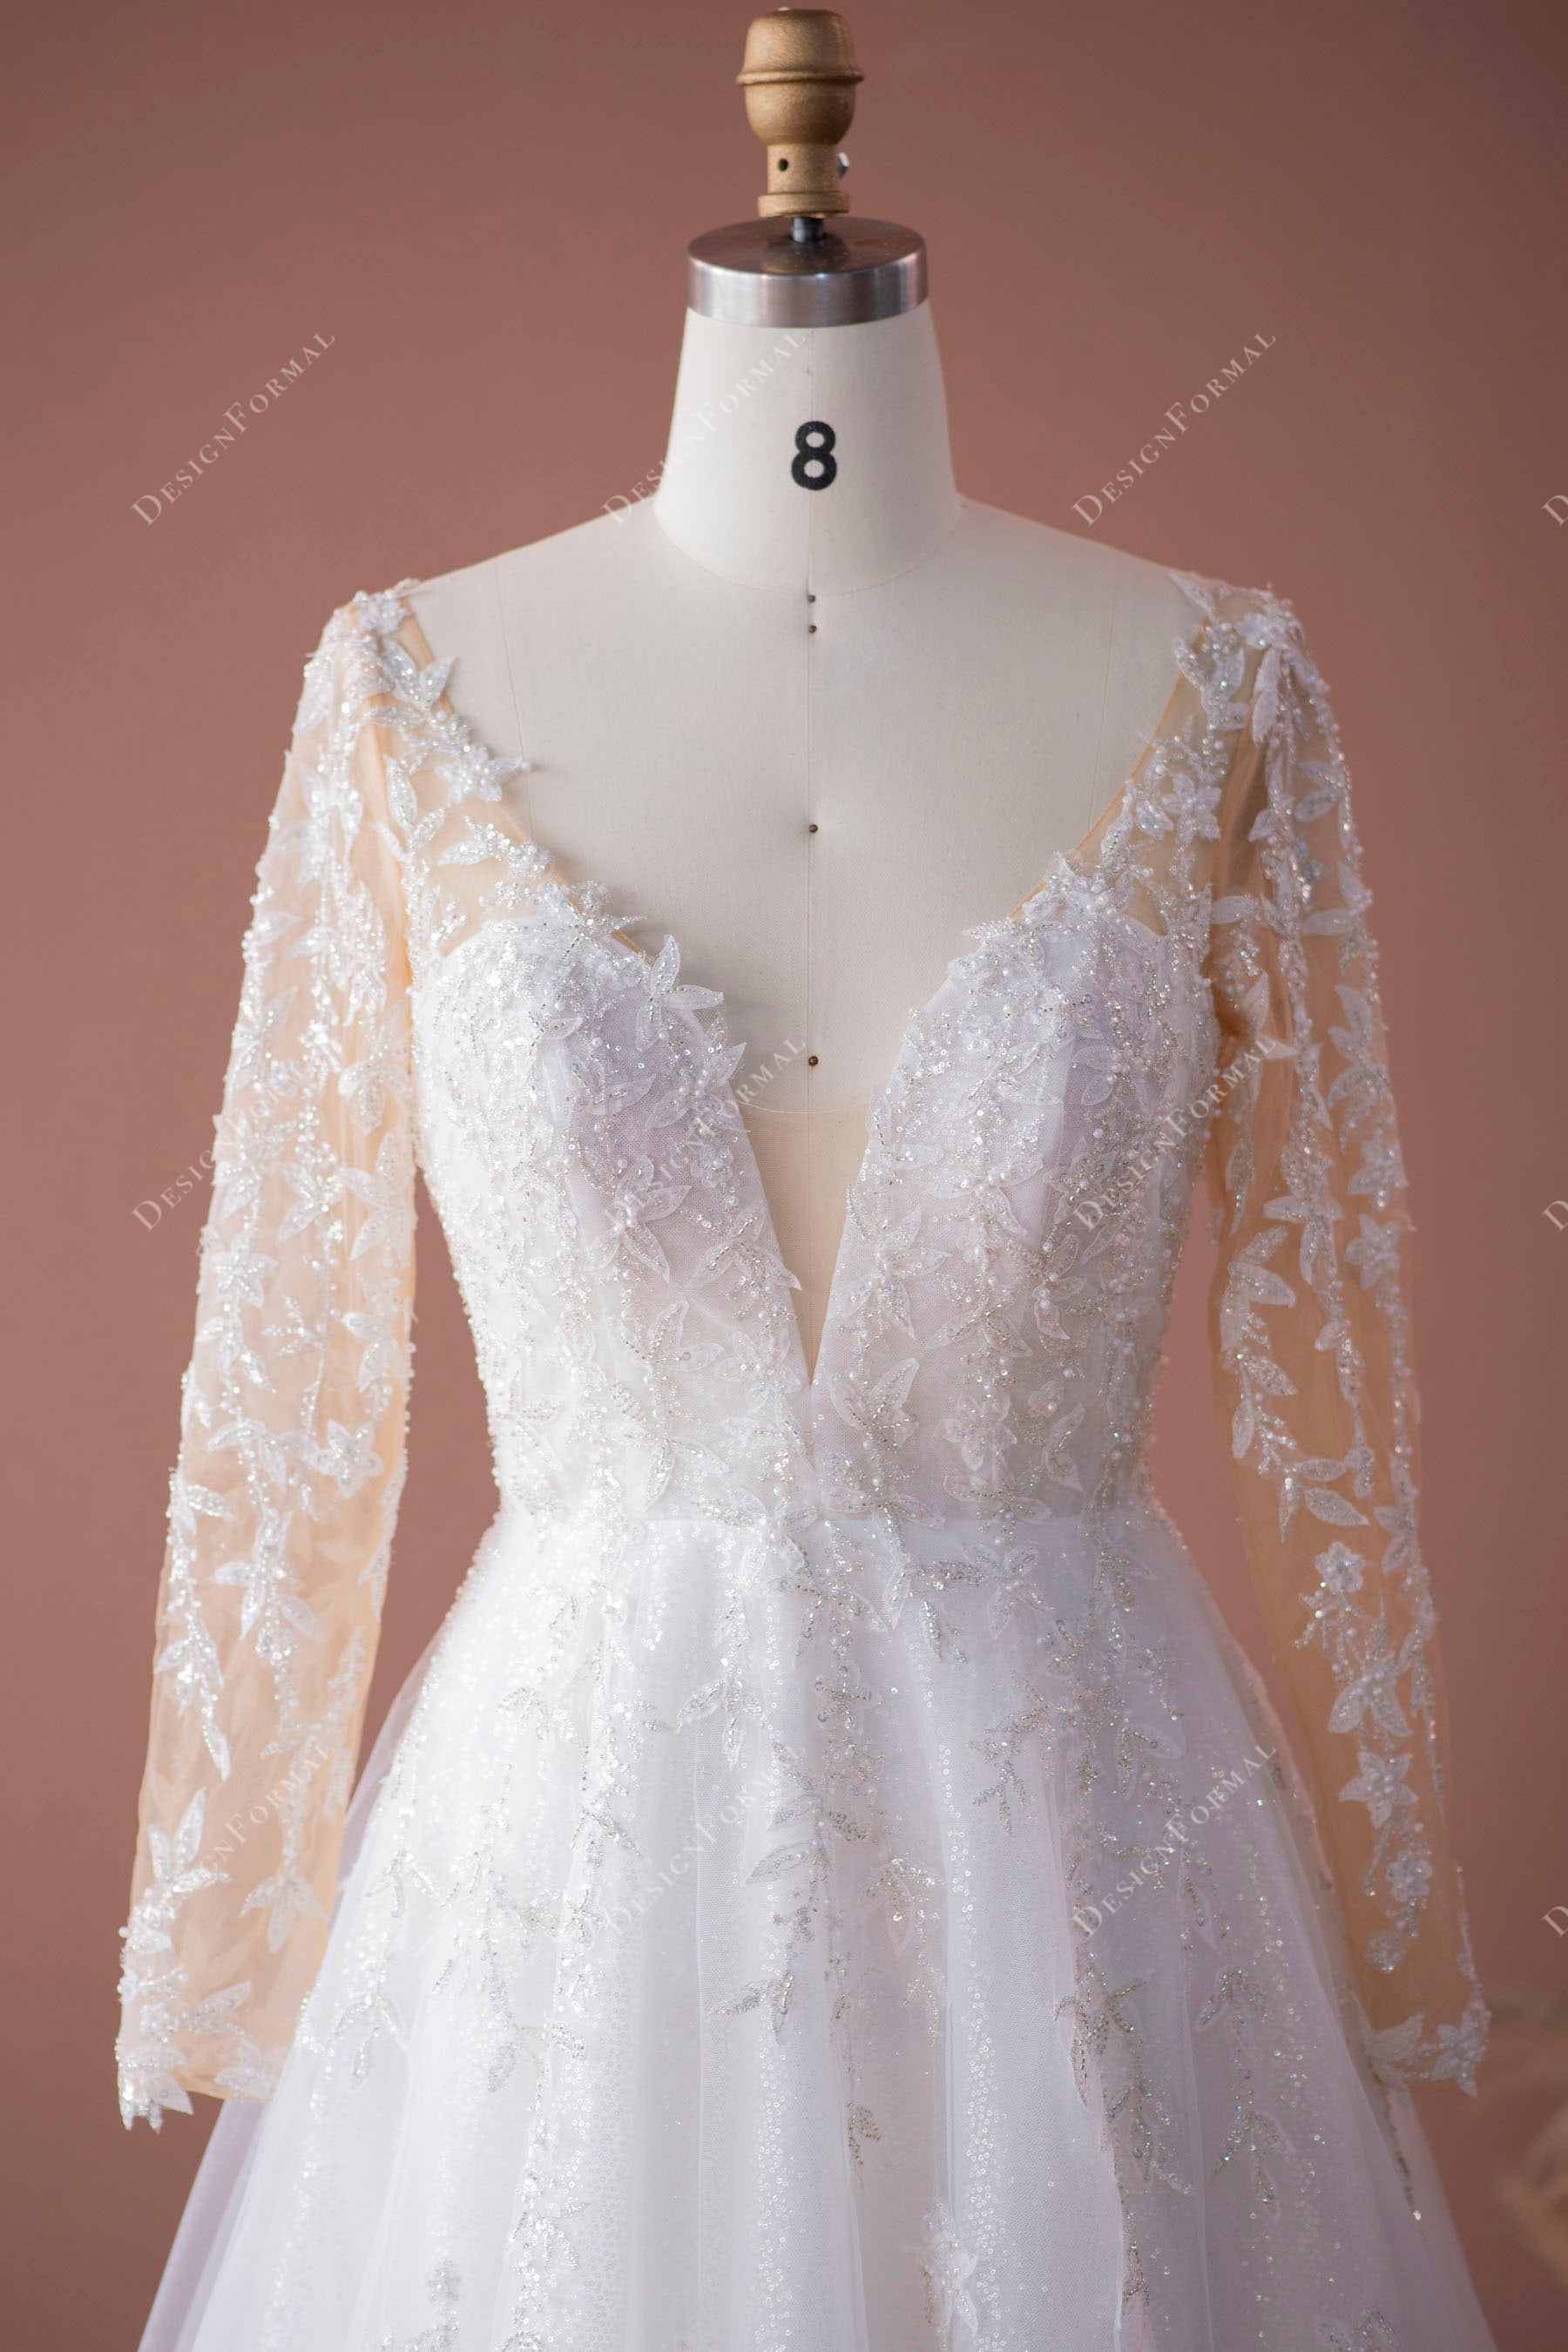 sheer lace tulle sleeved wedding gown with plunging neck